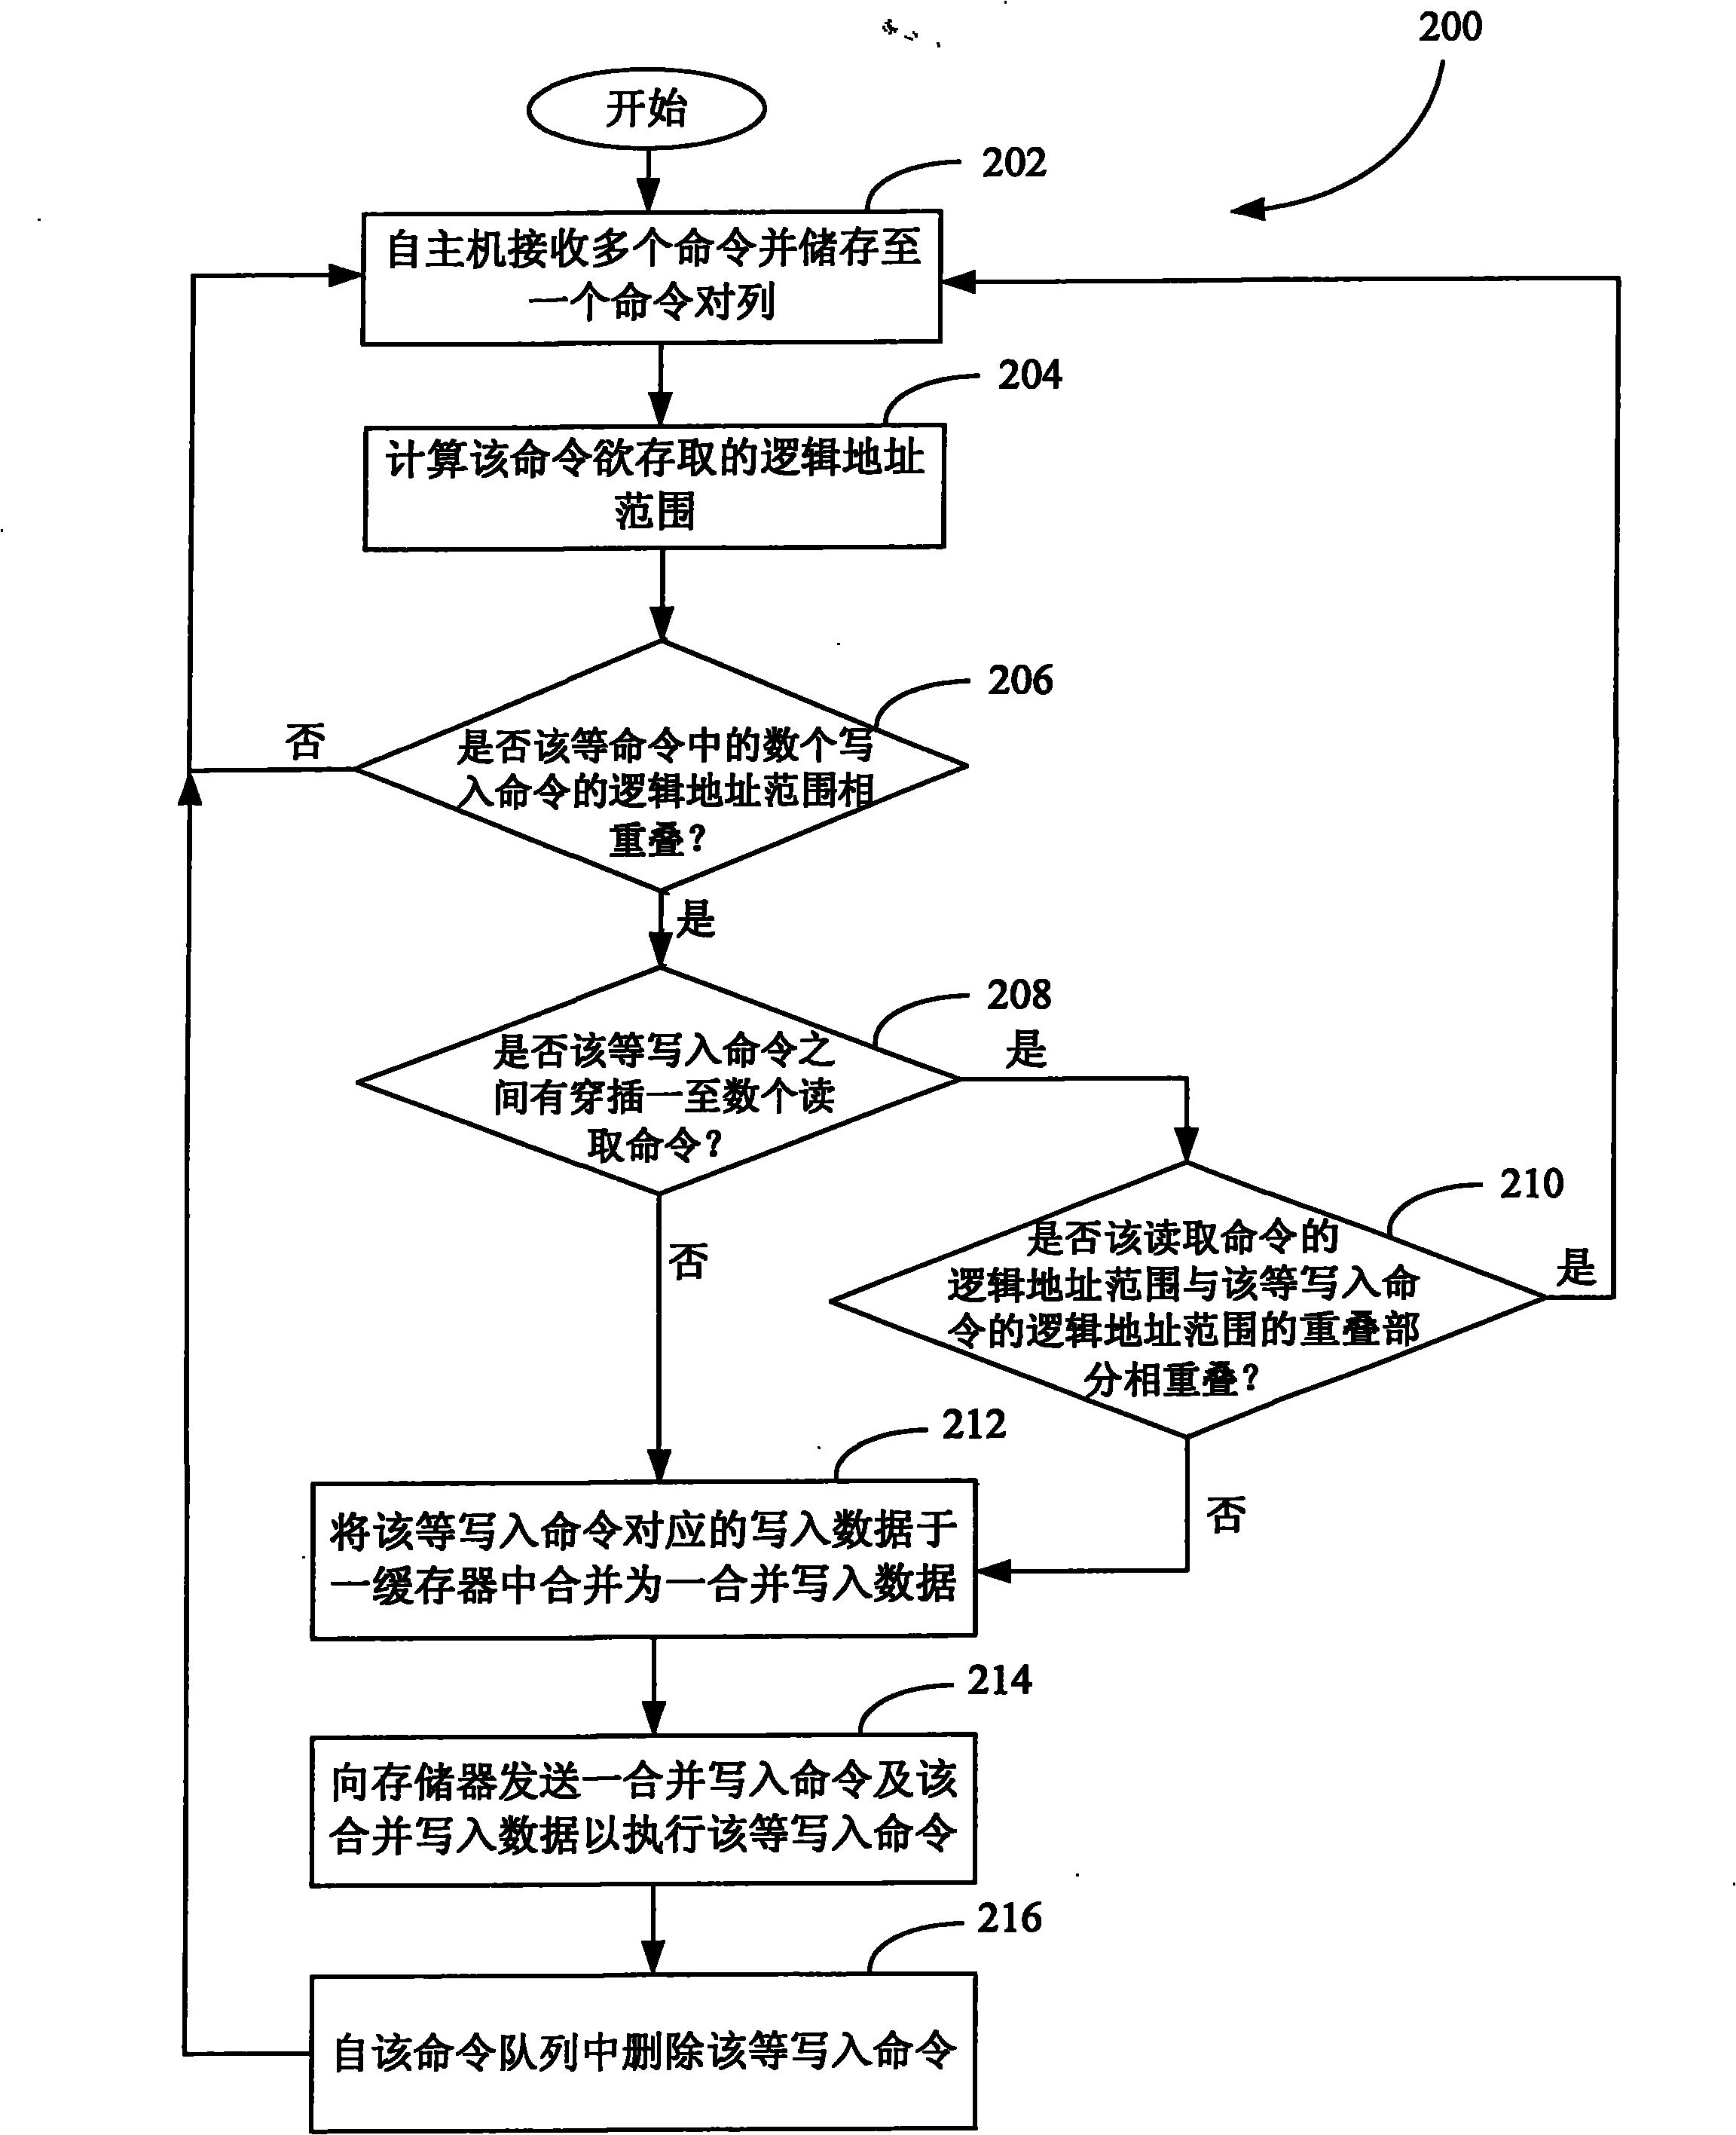 Memory device and data access method for memory unit